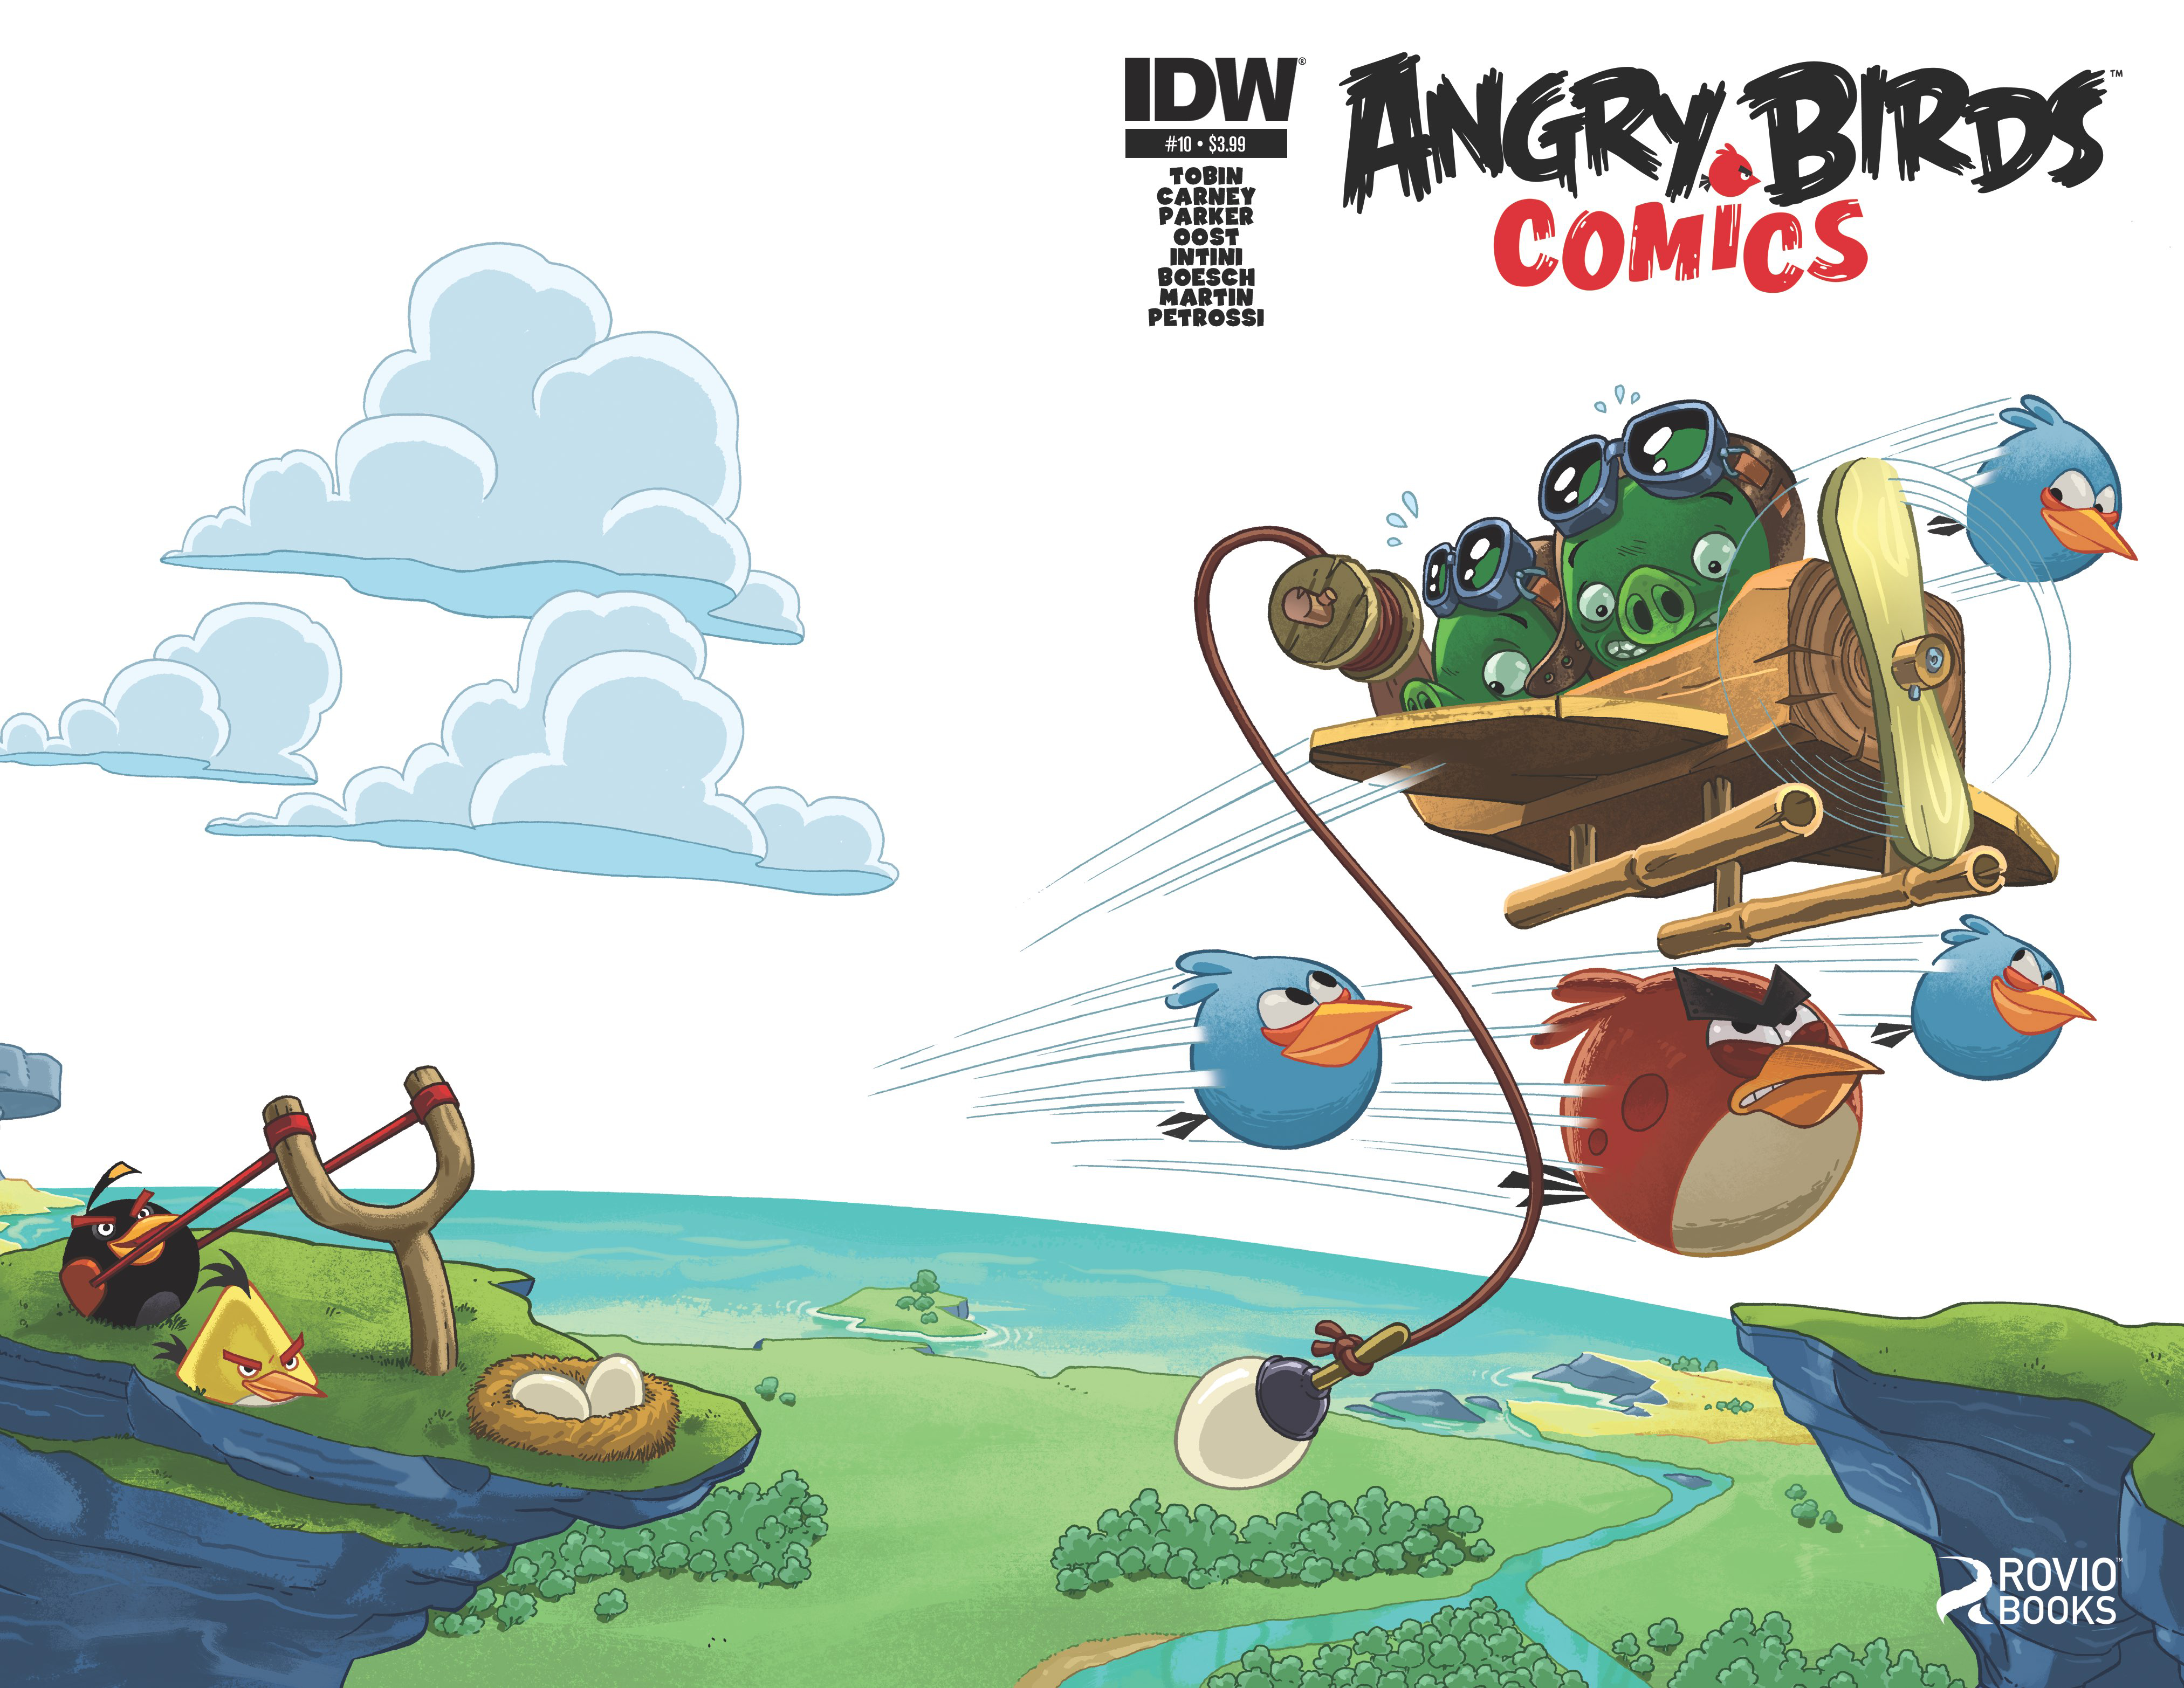 ANGRY BIRDS #10